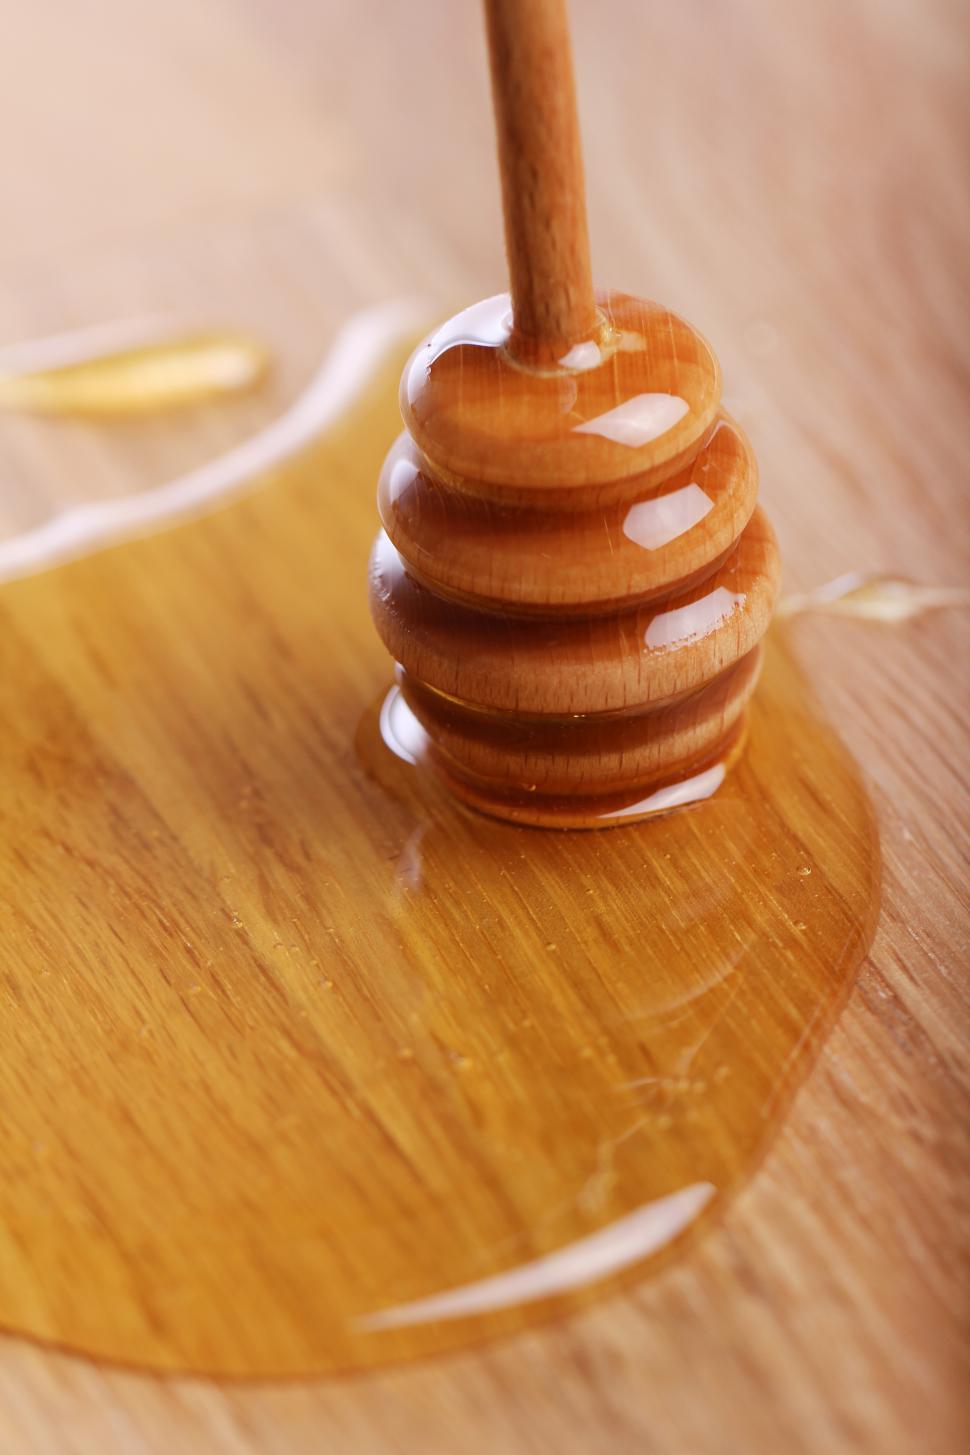 Free Image of Honey dipper and honey on the wooden table 